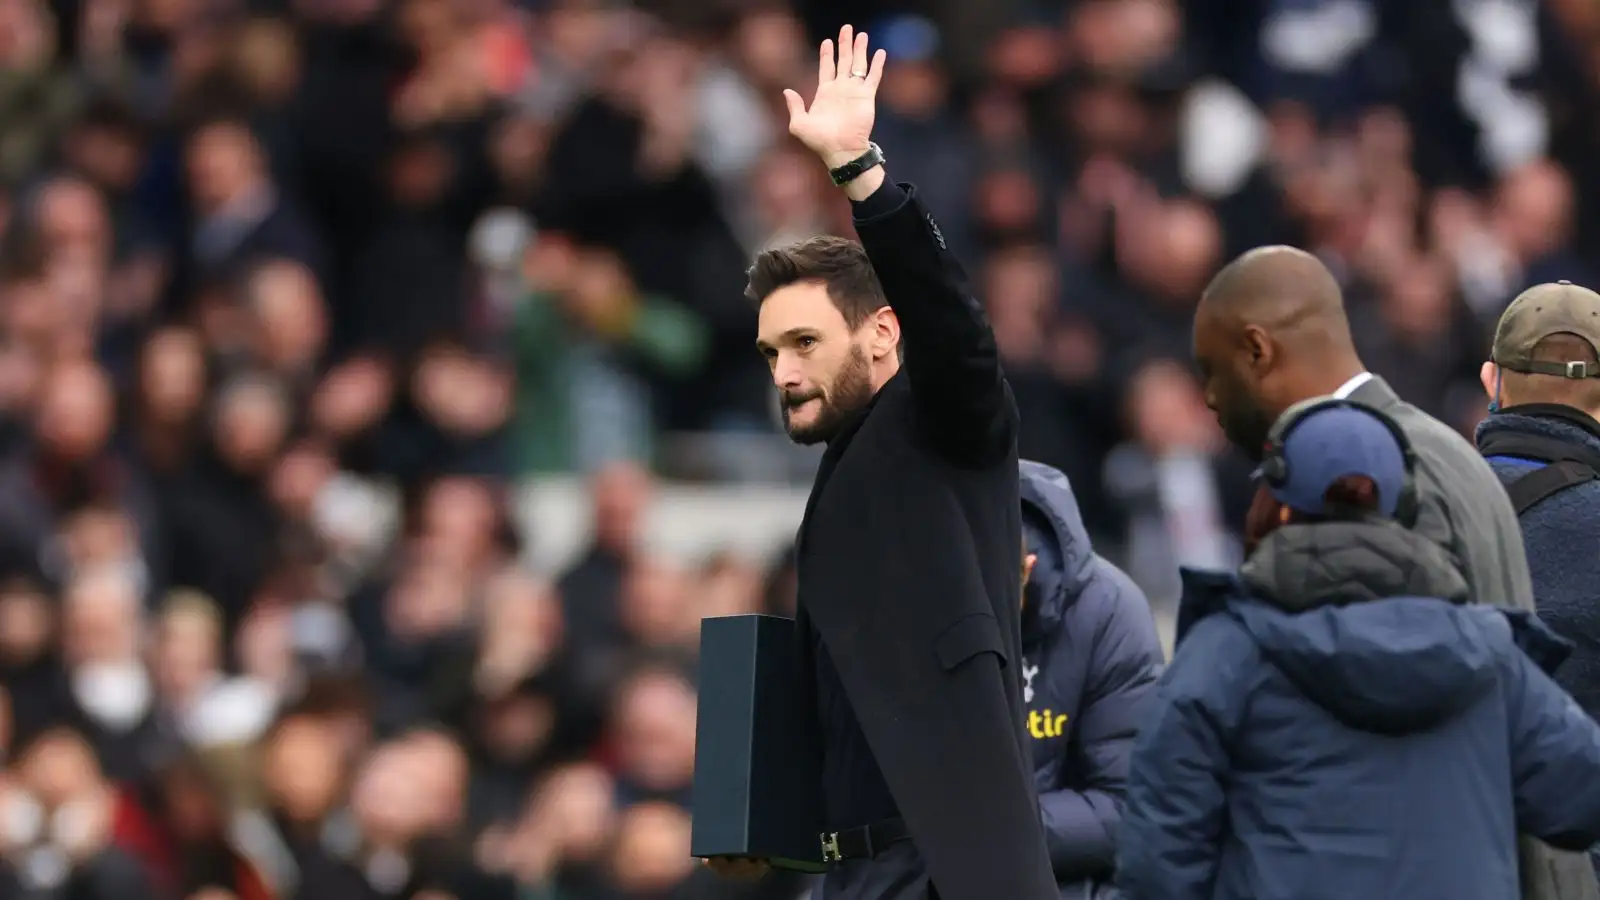 ‘Spurs fan for life’ Lloris predicts ‘bright future’ as he bids farewell after 11 years in North London